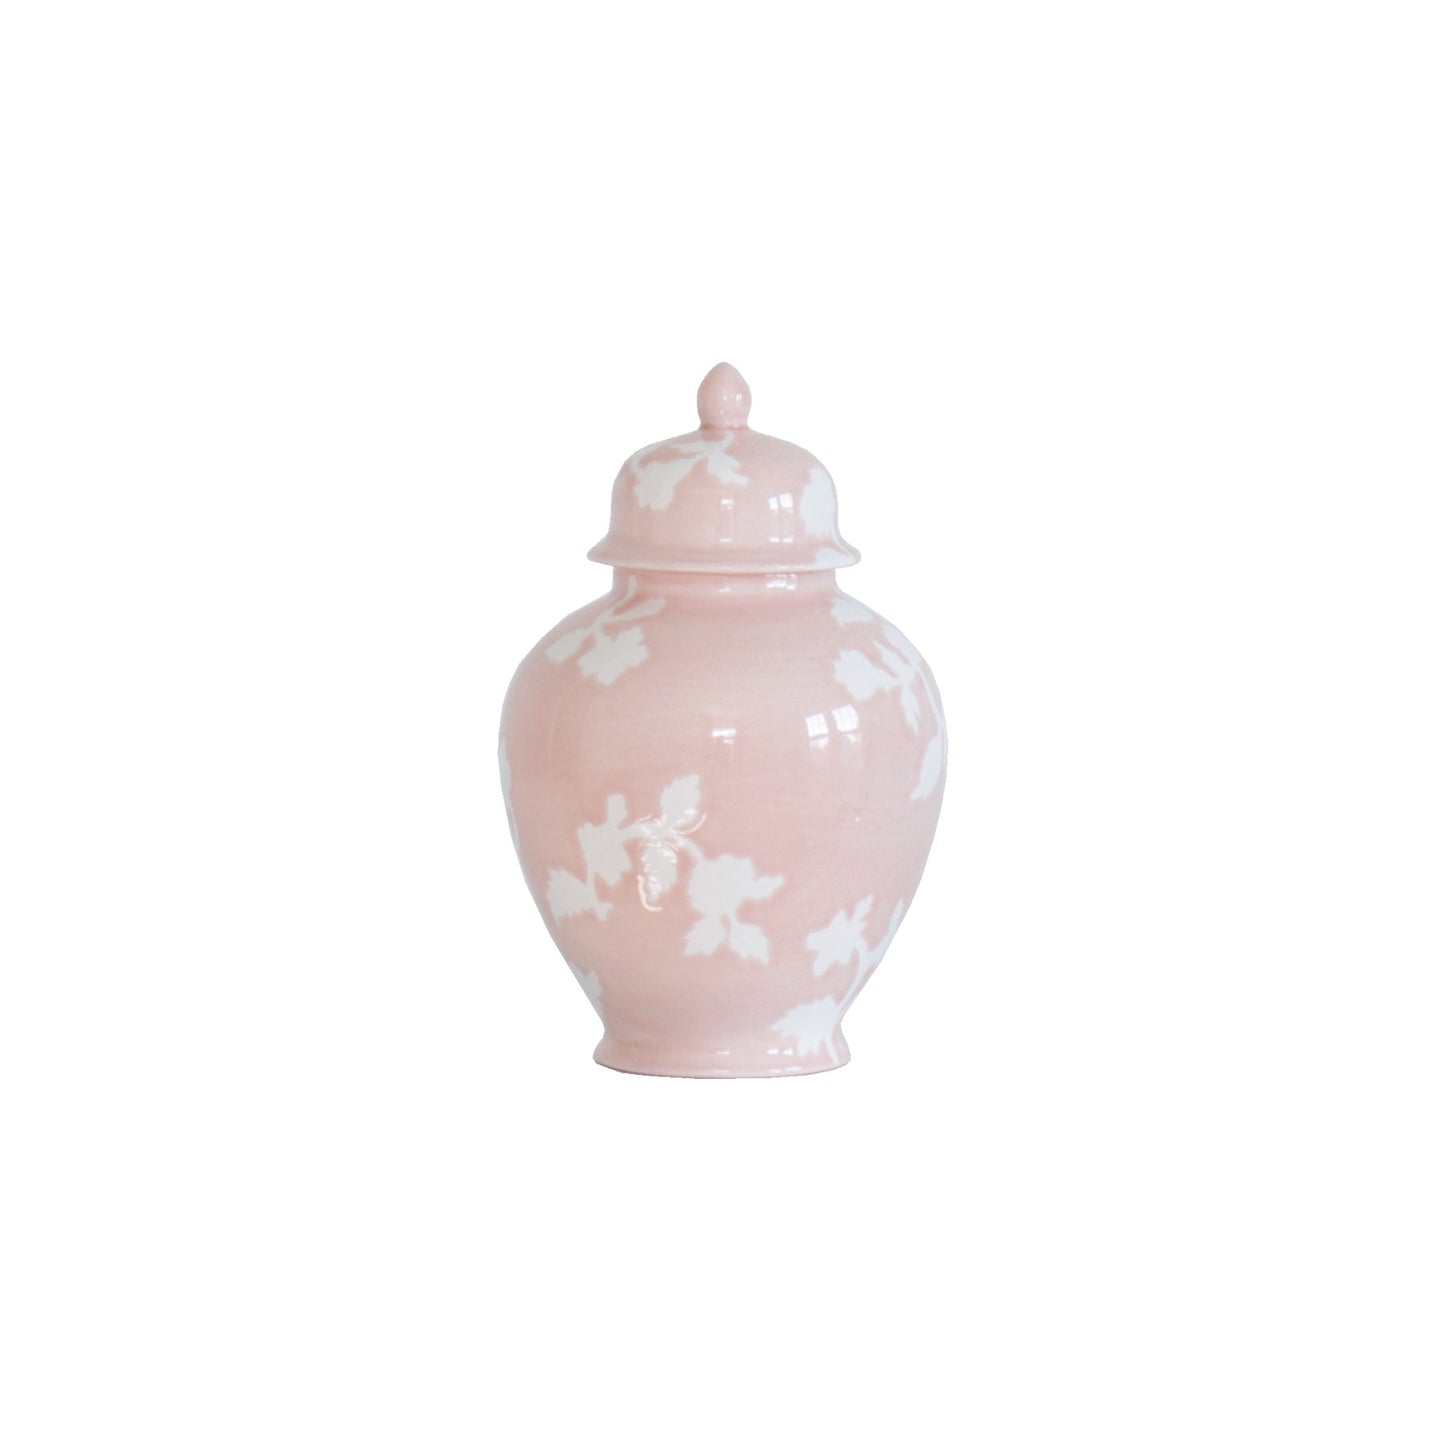 Chinoiserie Dreams Ginger Jars in Cherry Blossom Pink | Wholesale